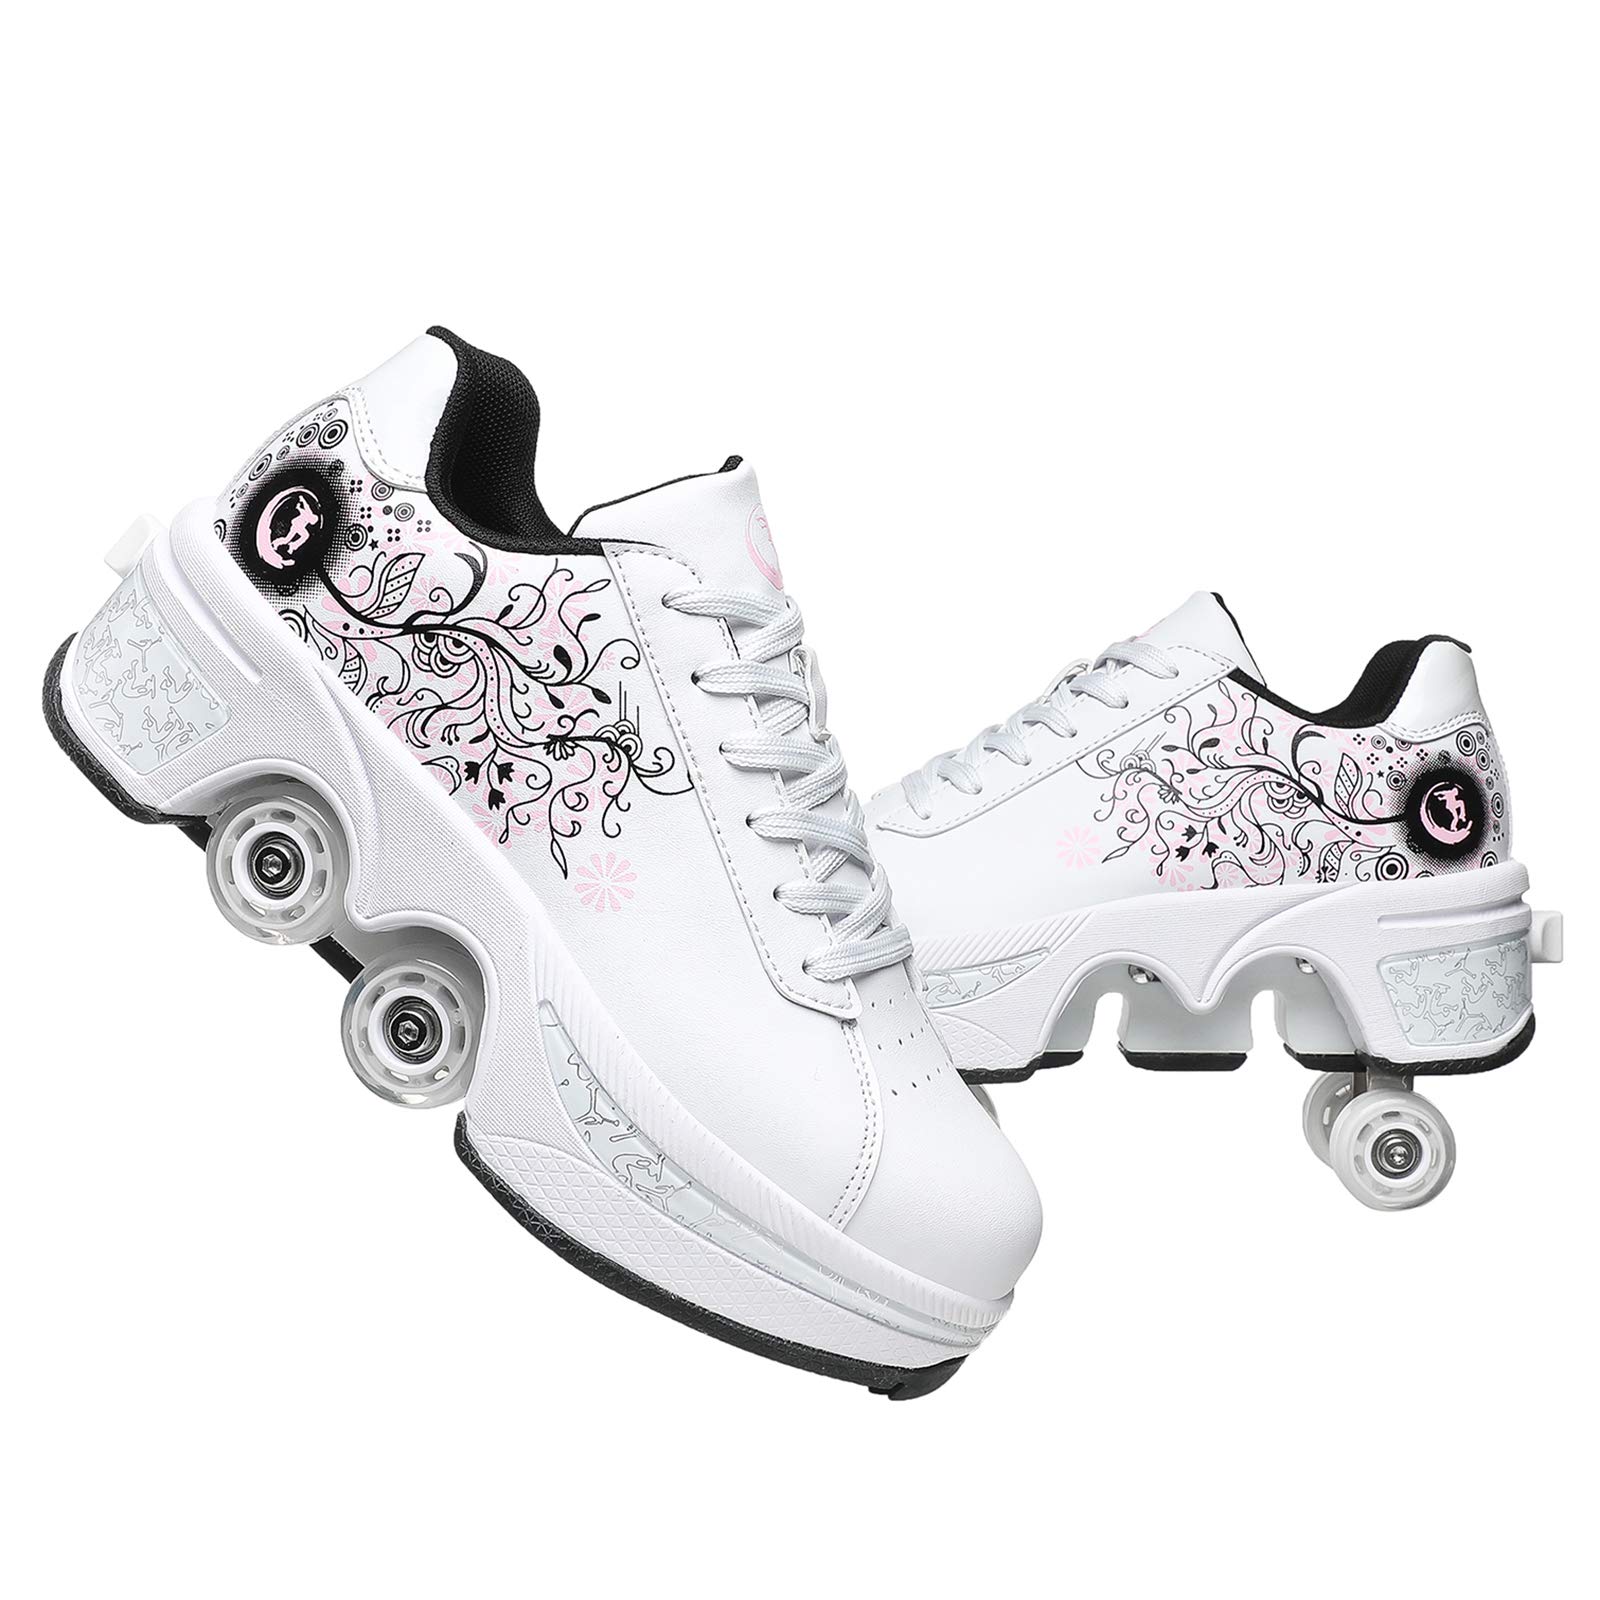 wedsf Double-Row Deform Wheel Automatic Walking Shoes Invisible Deformation Roller Skate 2 In 1 Removable Pulley Skates Skating Parkou